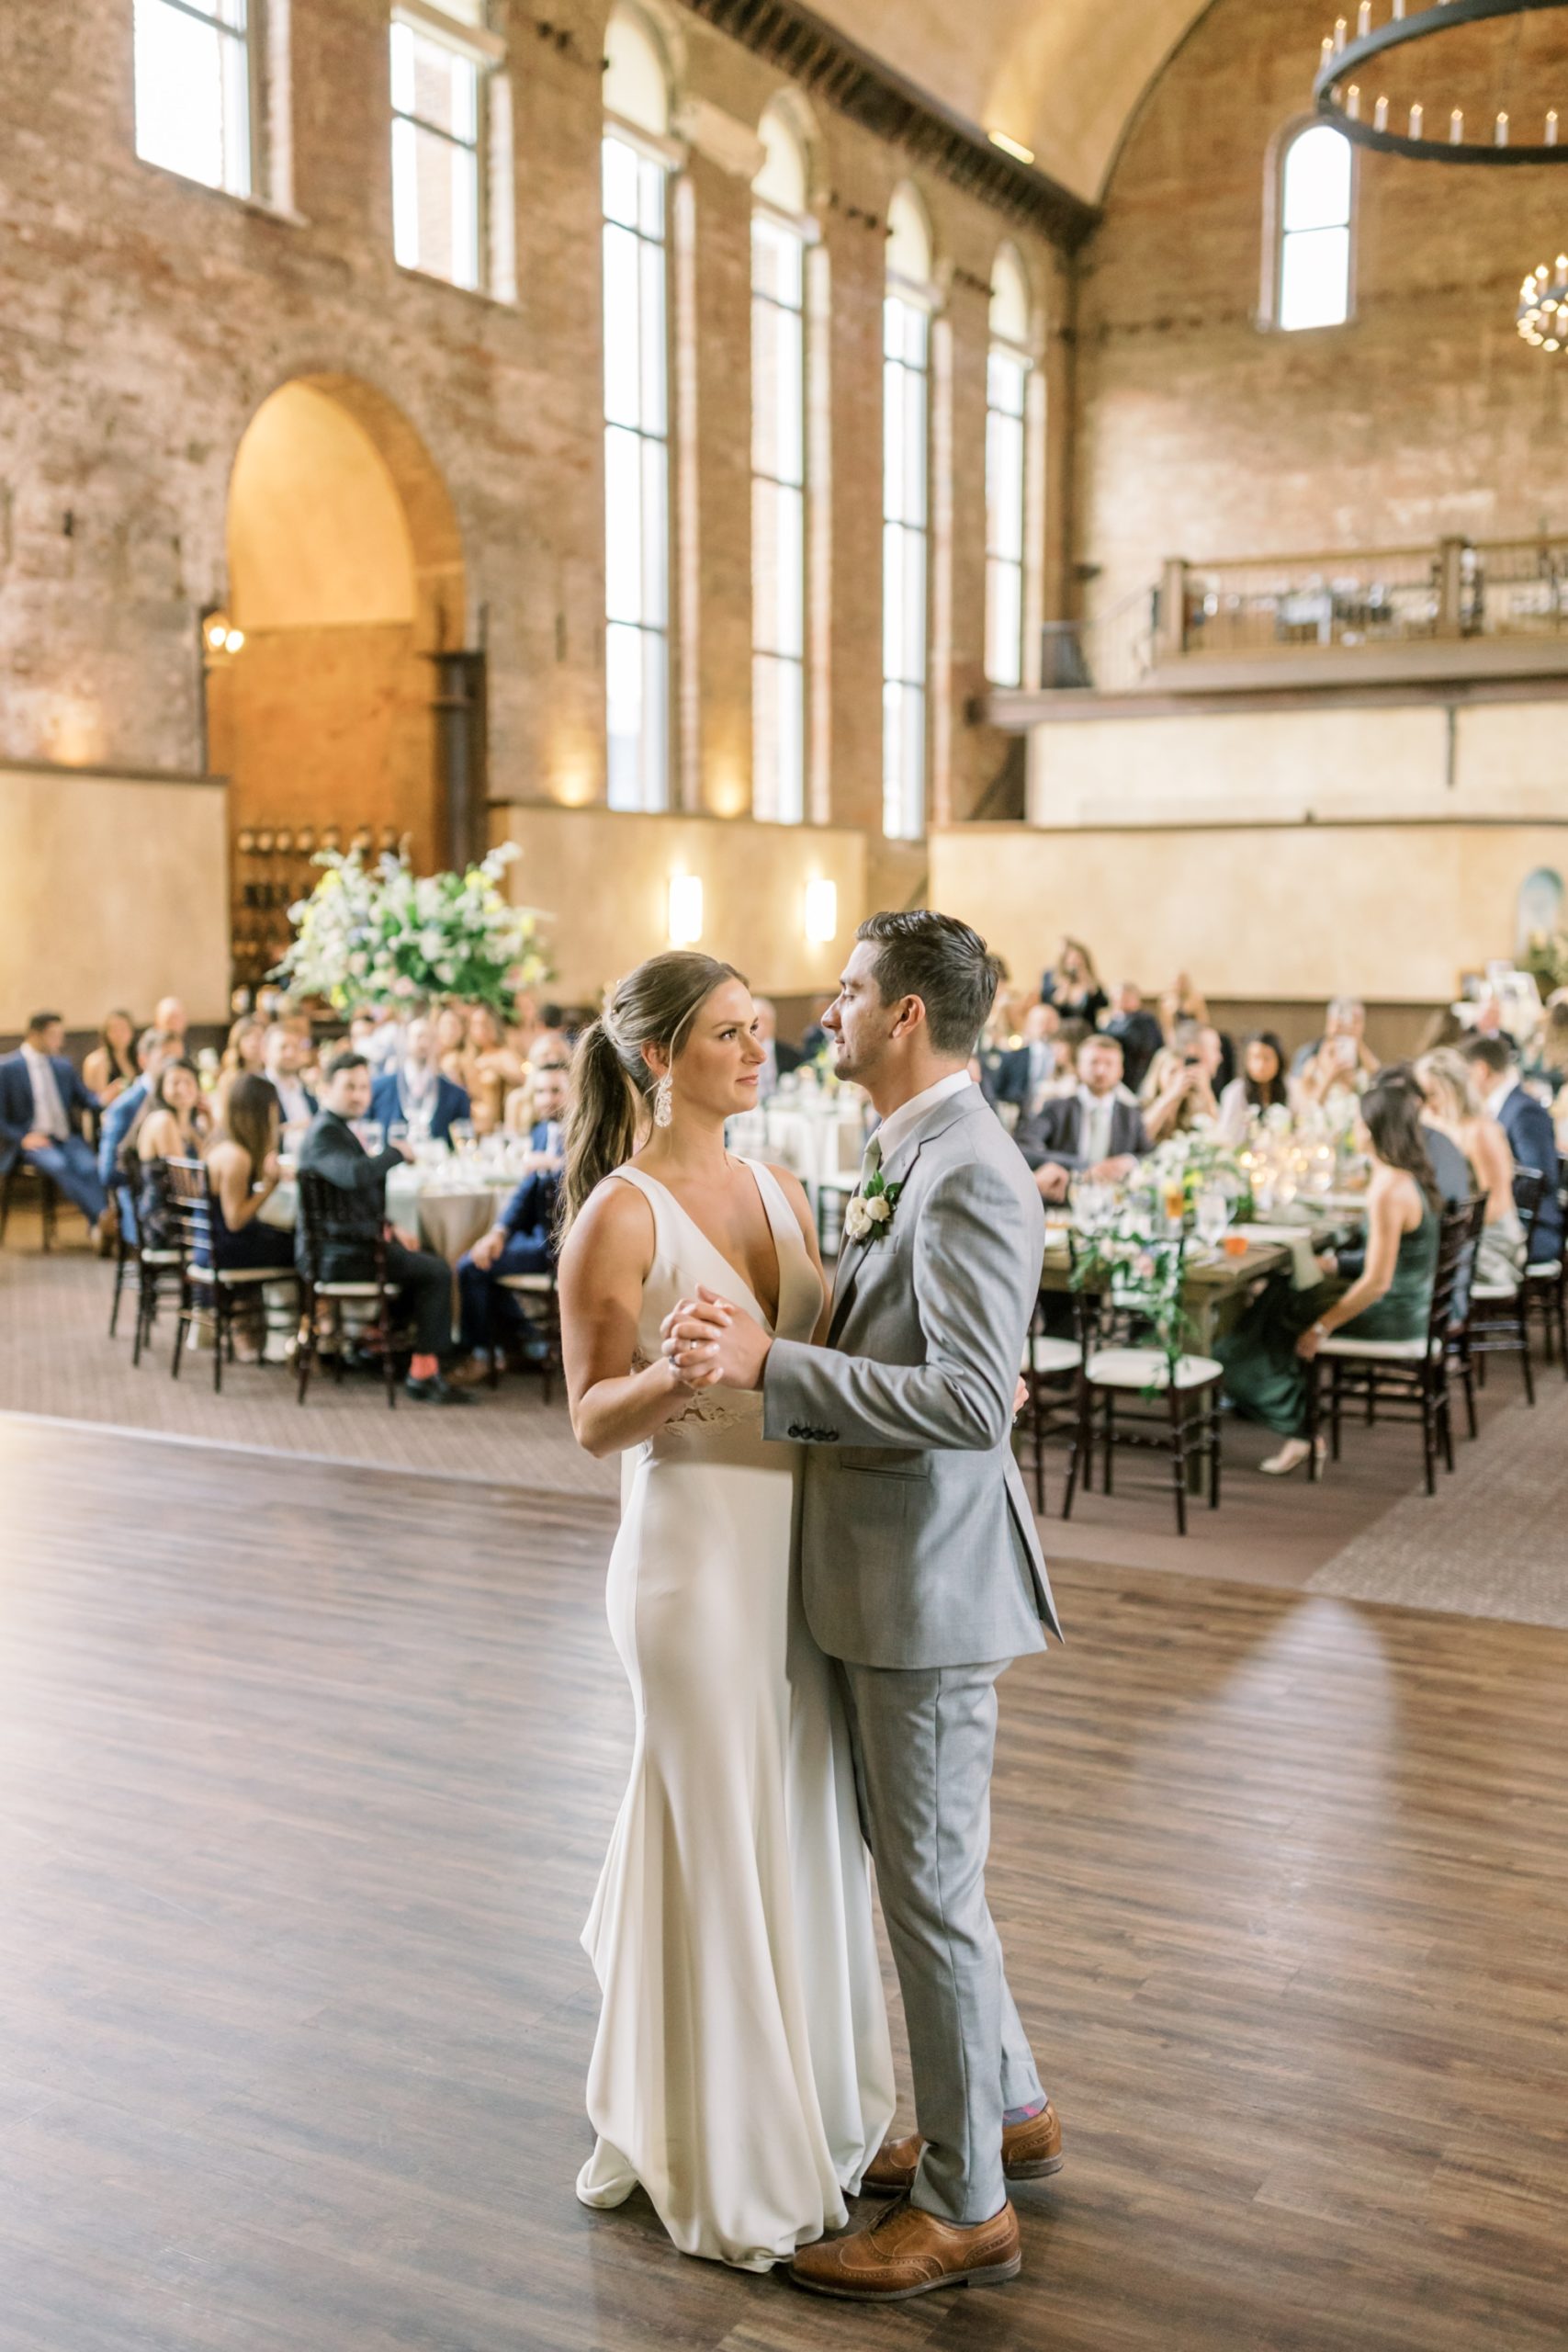 Photo of a bride and groom's first dance at their wedding reception